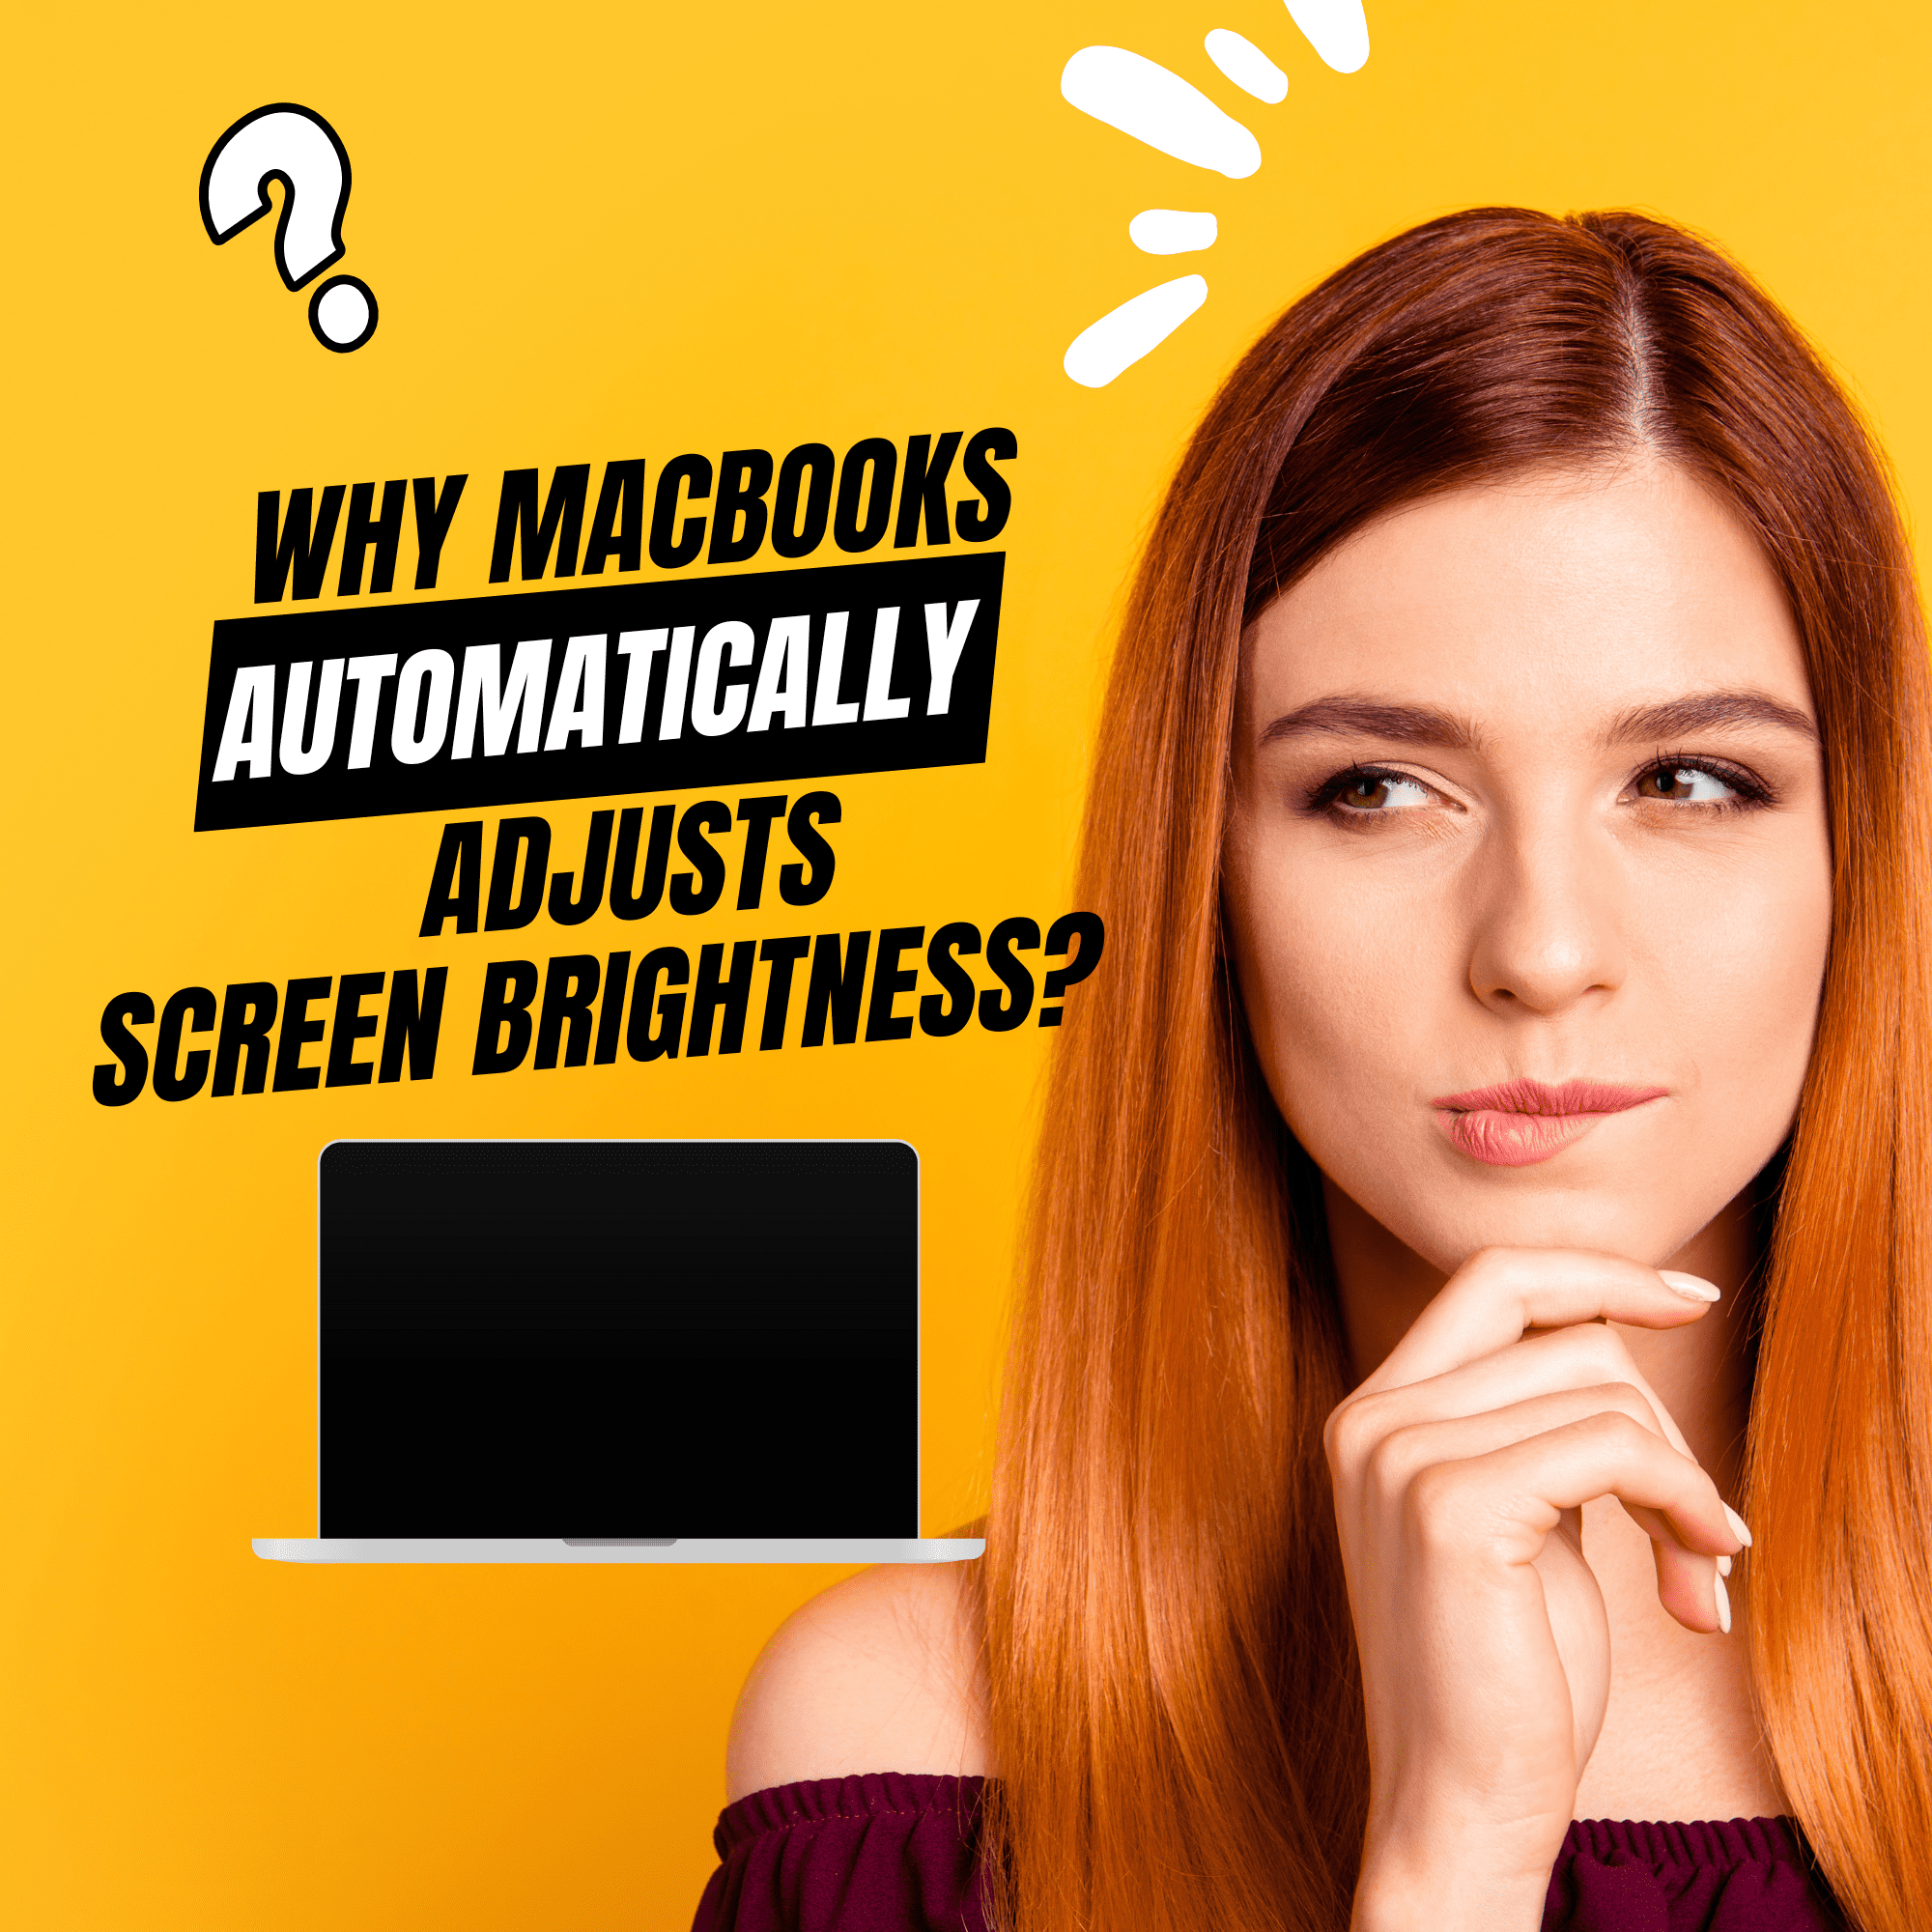 why macbook automatically adjusts screen brightness - how to fix it